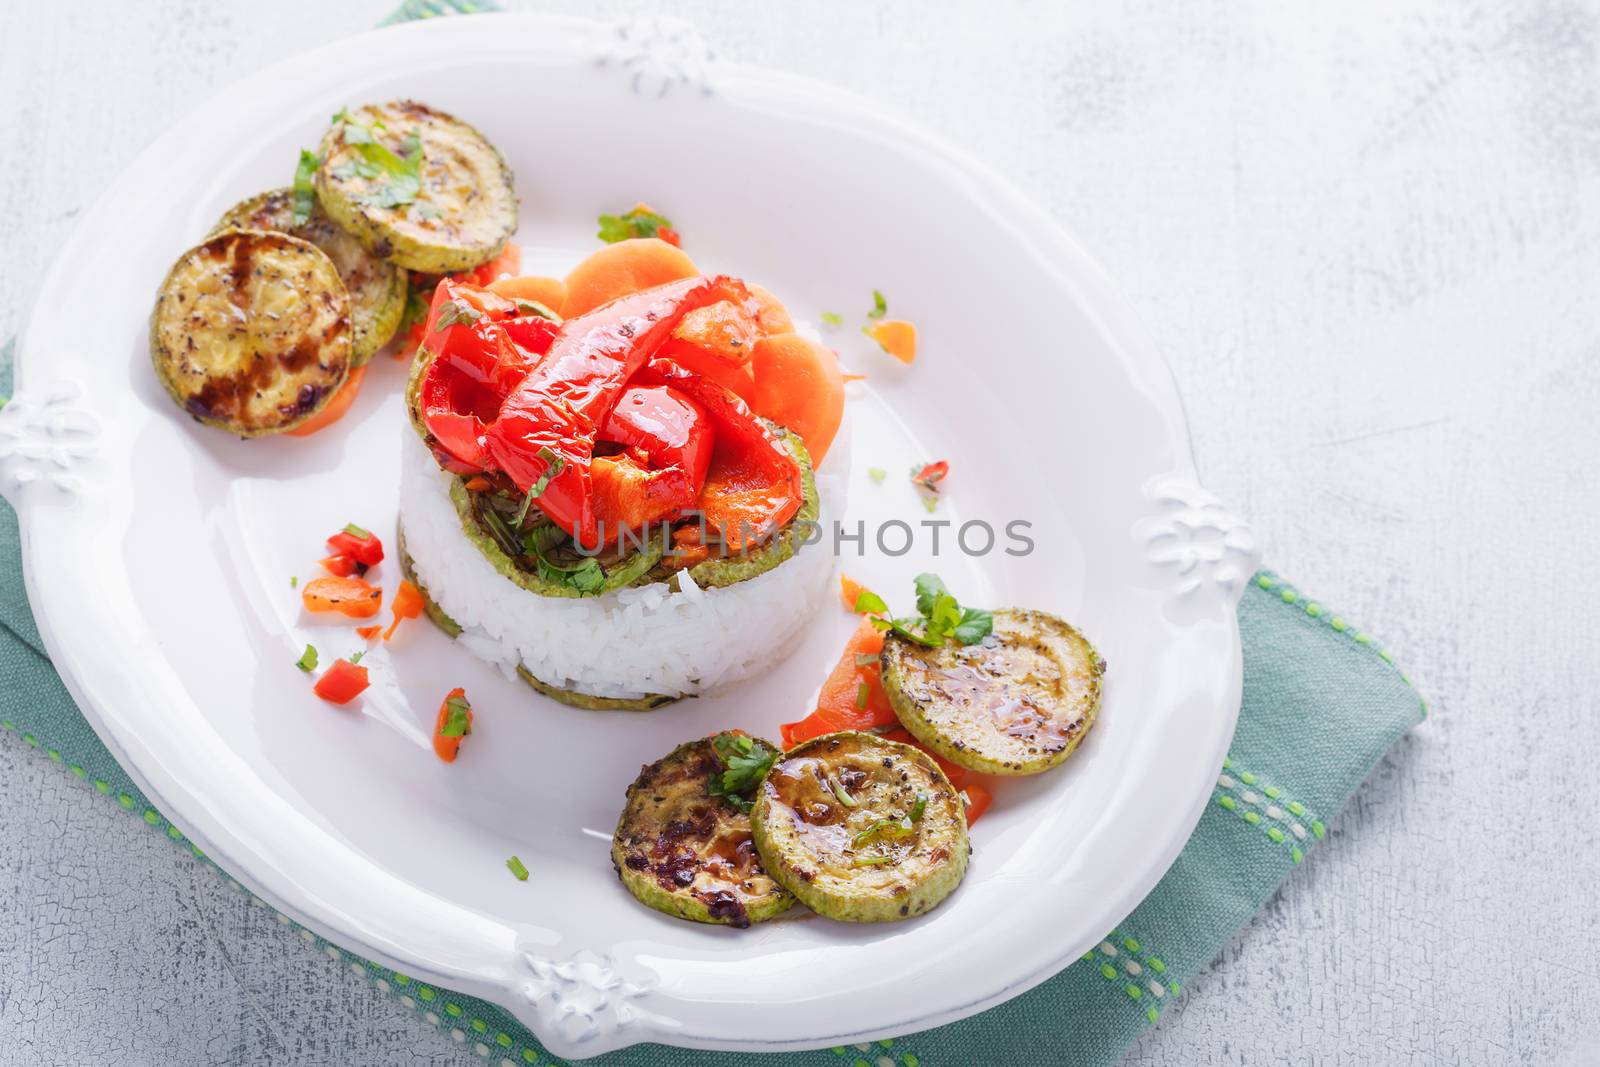 Rice timbale with vegetables by supercat67